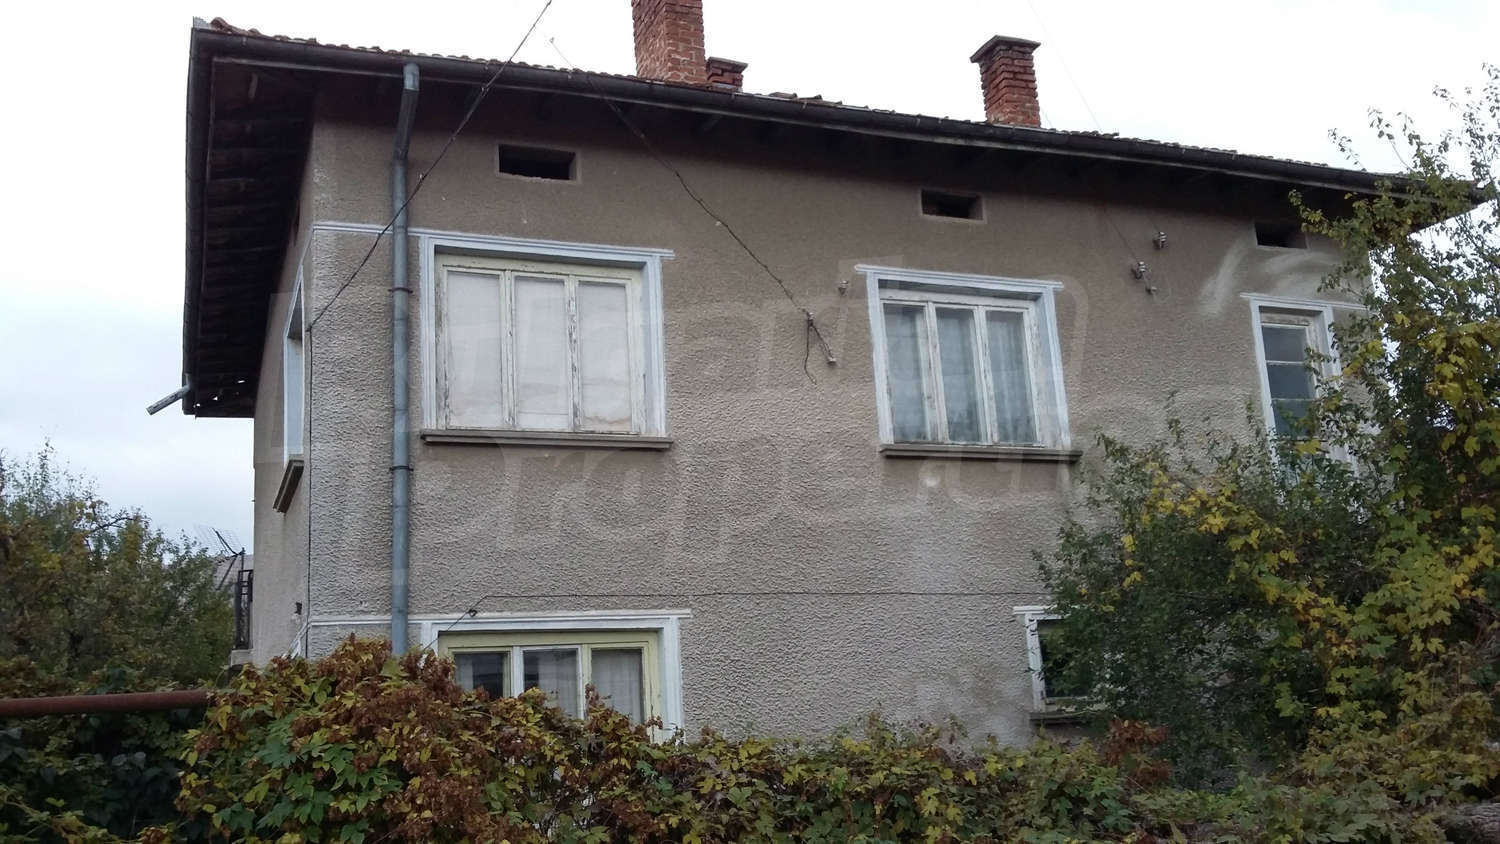 House For Sale Near Montana Bulgaria Two Storey House In Village 18 Km From Montana